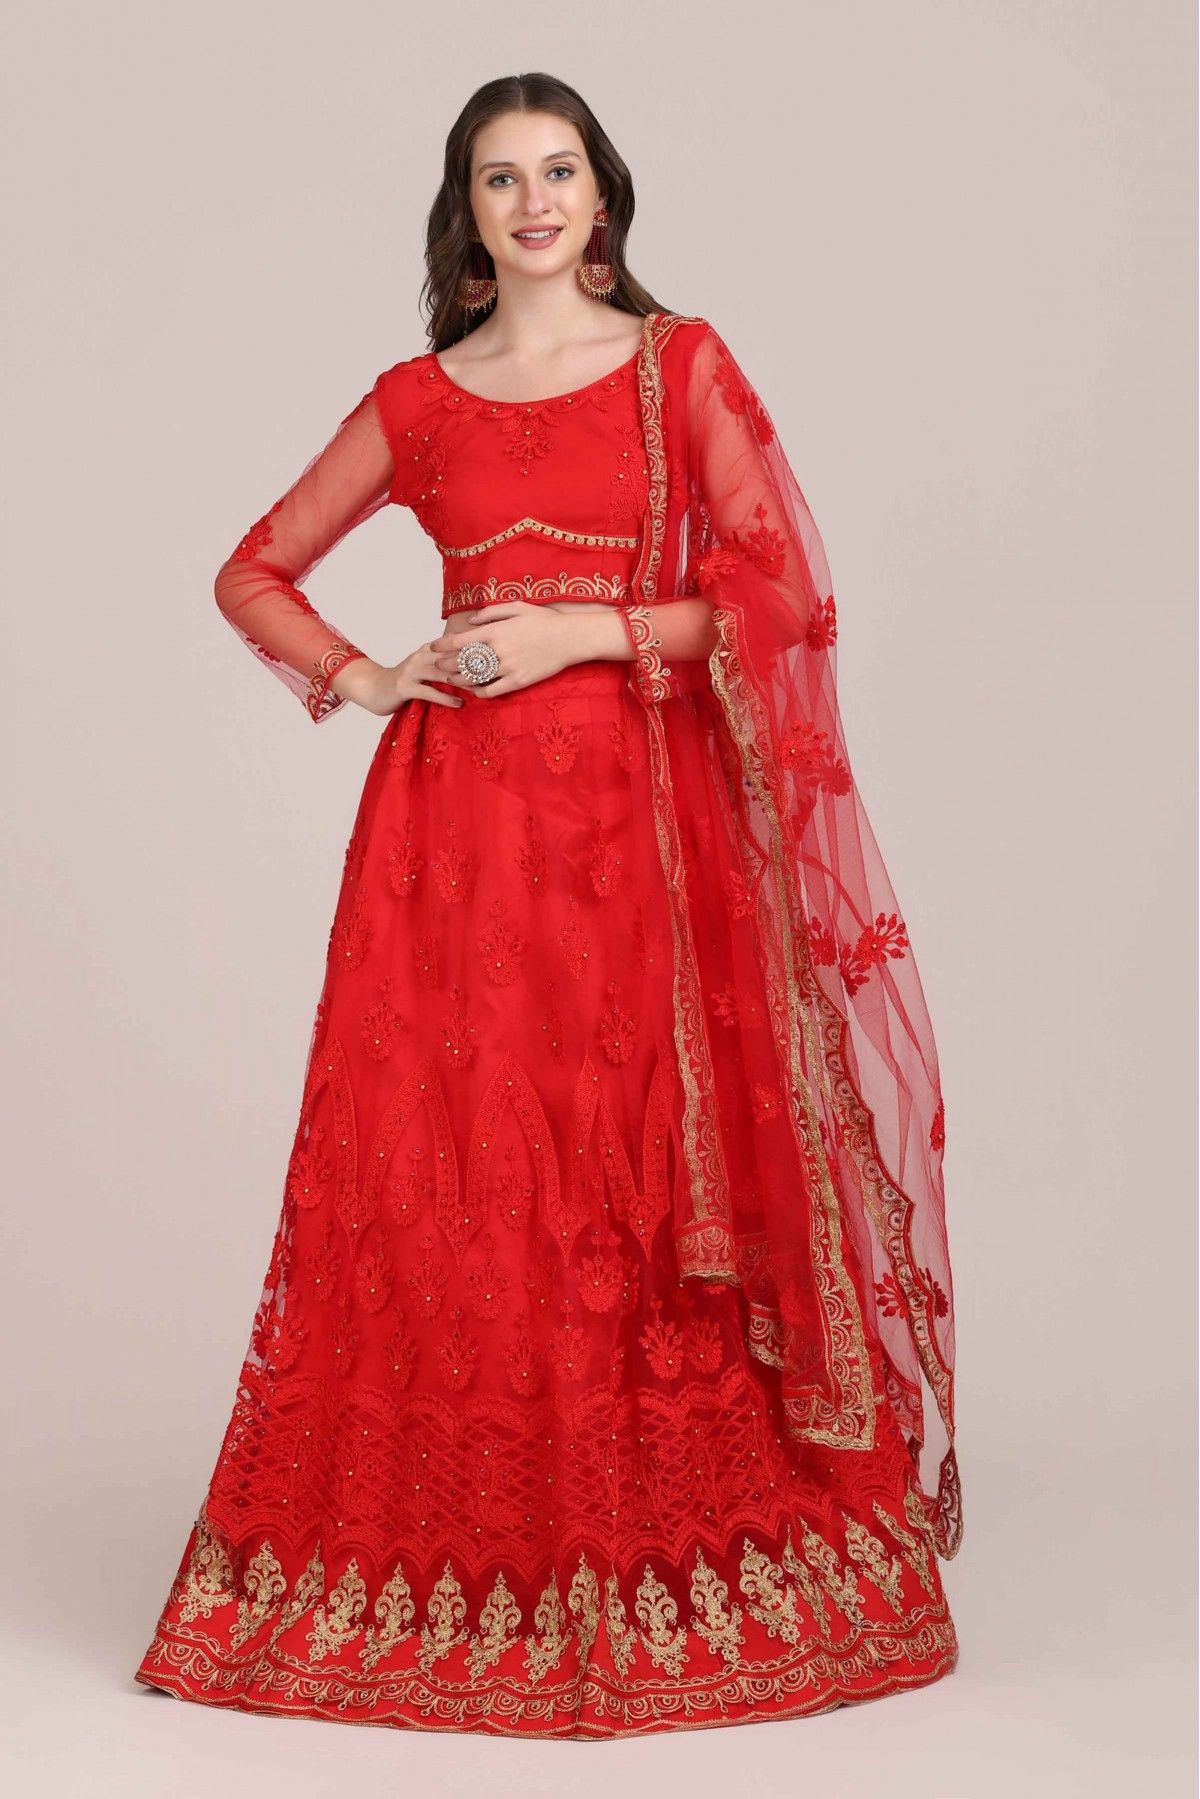 Net Embroidery Lehenga Choli In Red Colour LD5680135 A